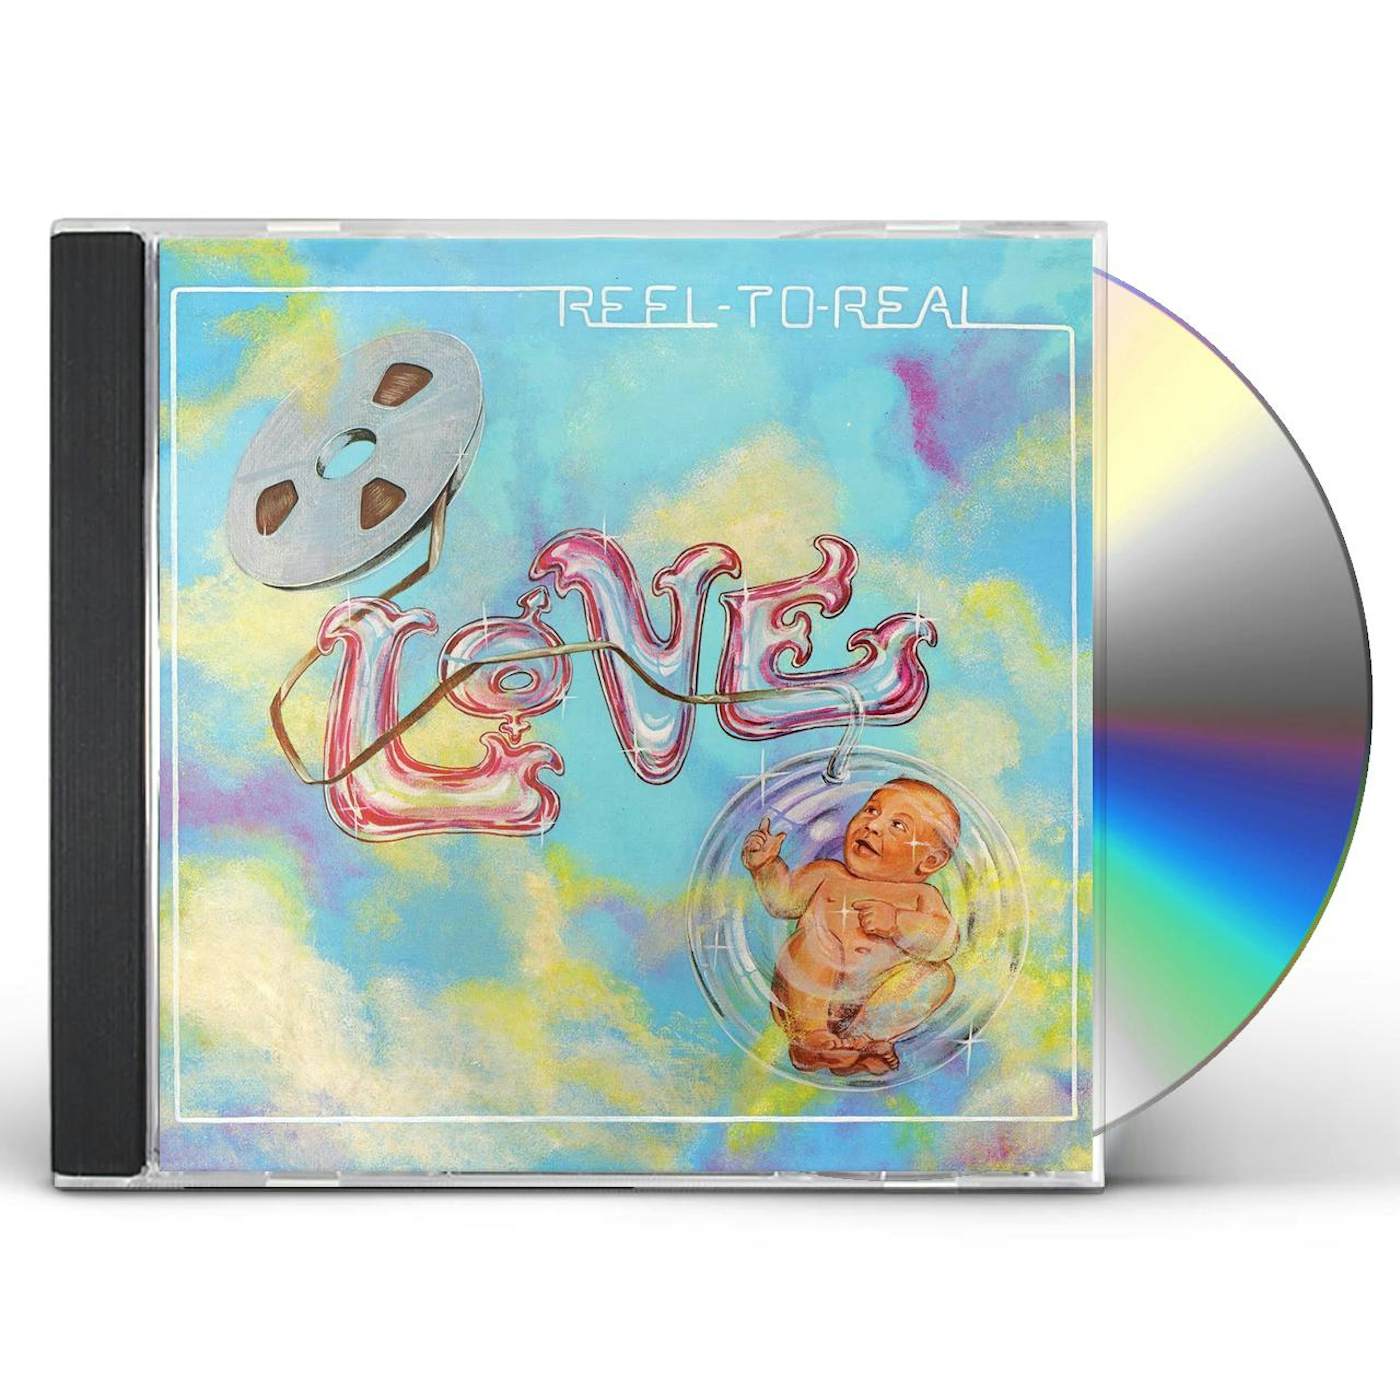 Love REEL TO REAL CD $32.49$28.99